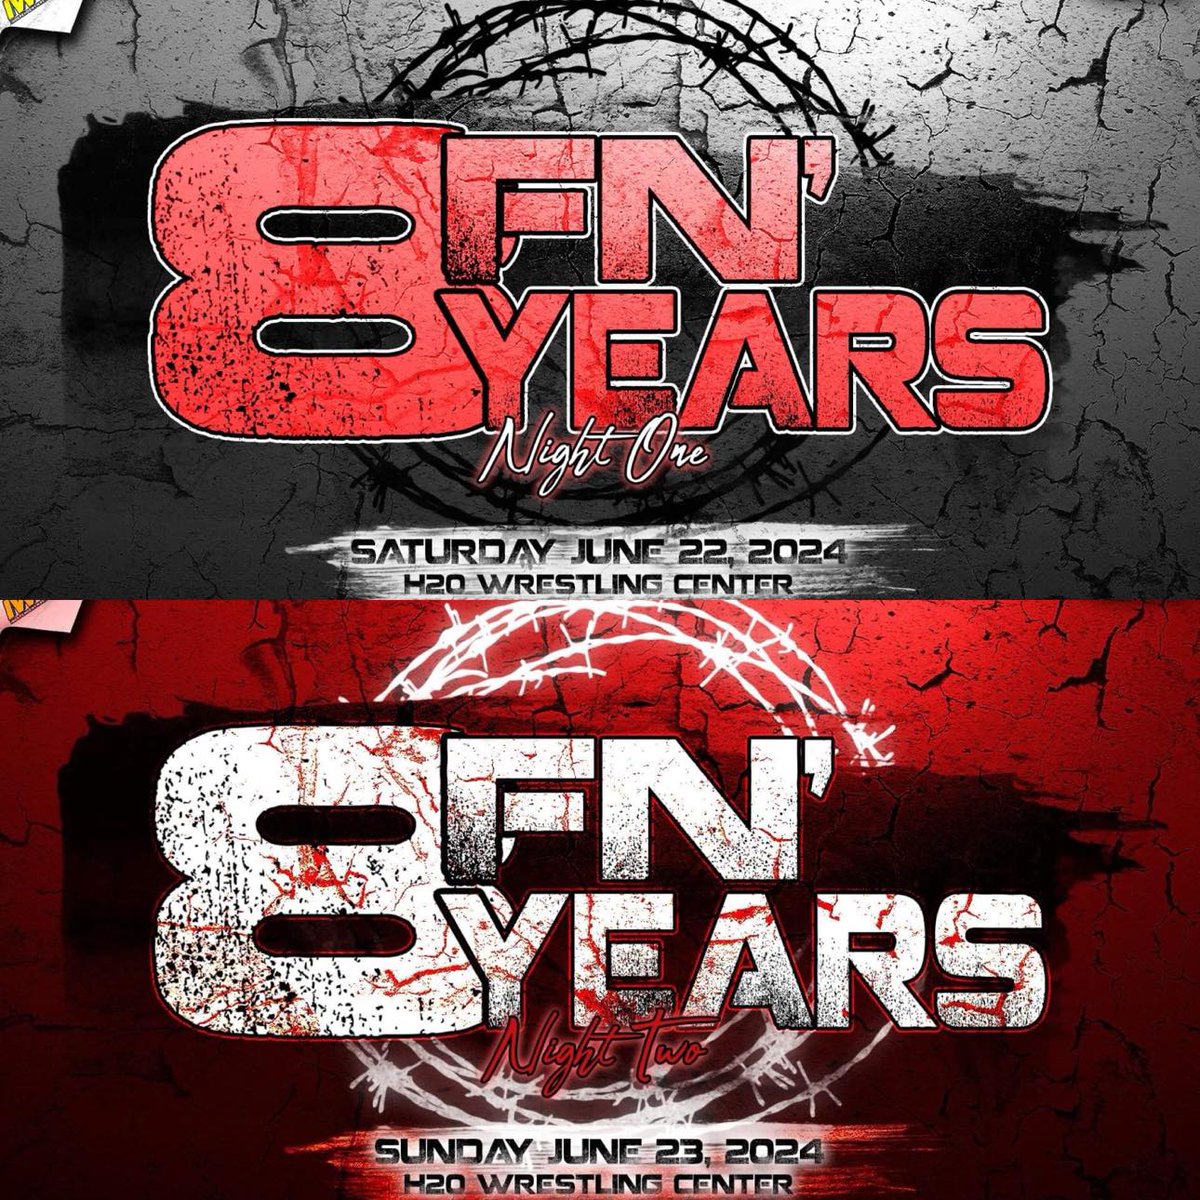 Celebrate 8 F'N YEARS of H2O Wrestling! 2 Night x Anniversary Weekend! Night One Sat, June 22nd Tix: $25 LIVE on IWTV - 8pm Night Two Sun, June 23rd Tix: $30 LIVE on IWTV - 6pm DM/Email: tremont2k11@gmail.com to reserve tix H2O Wrestling Center Williamstown,NJ